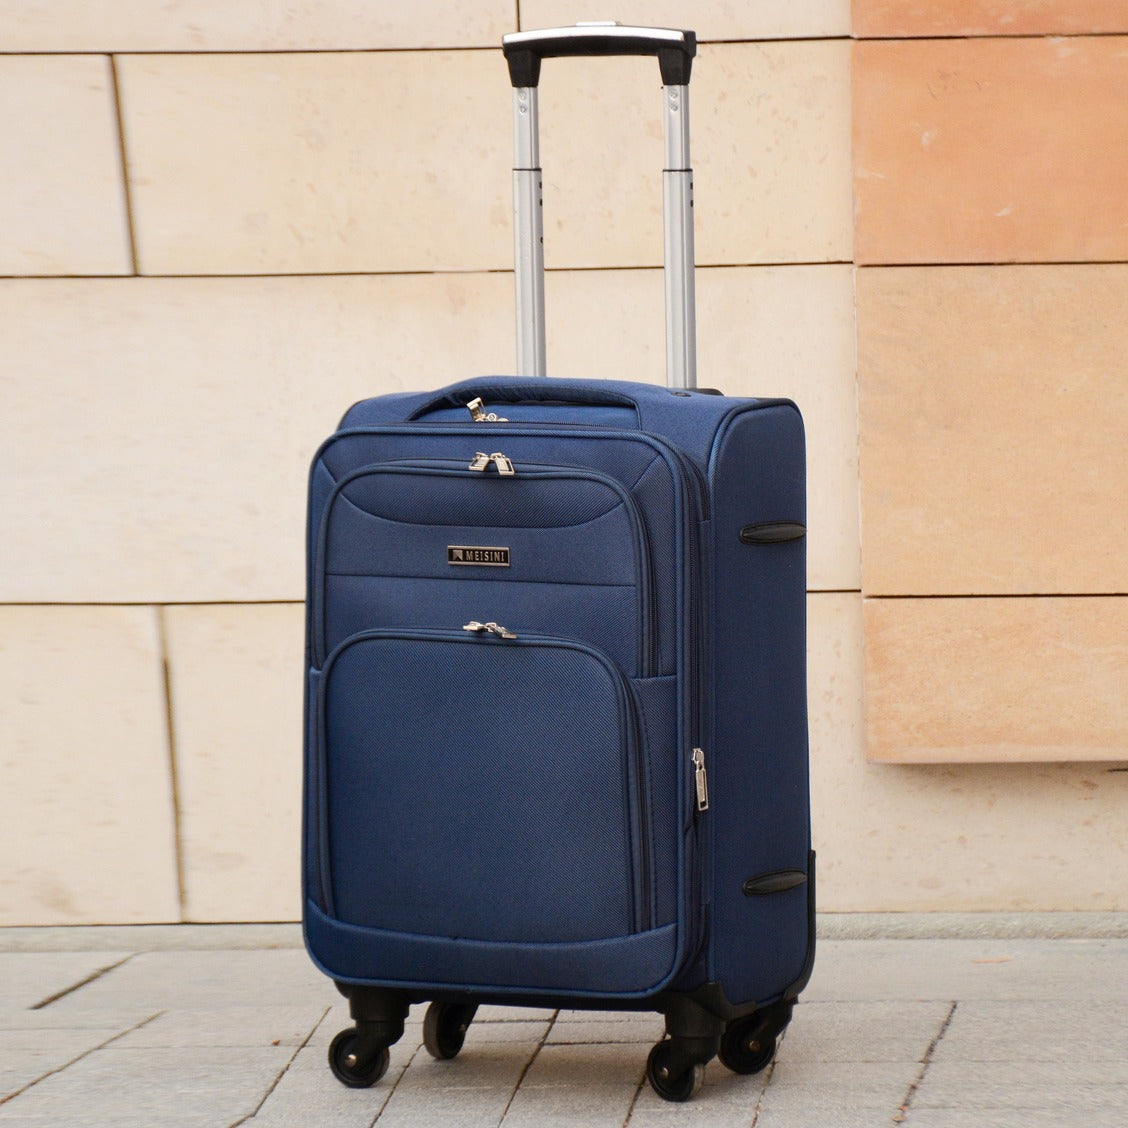 32" Blue Colour LP 4 Wheel 0169 Luggage Lightweight Soft Material Trolley Bag